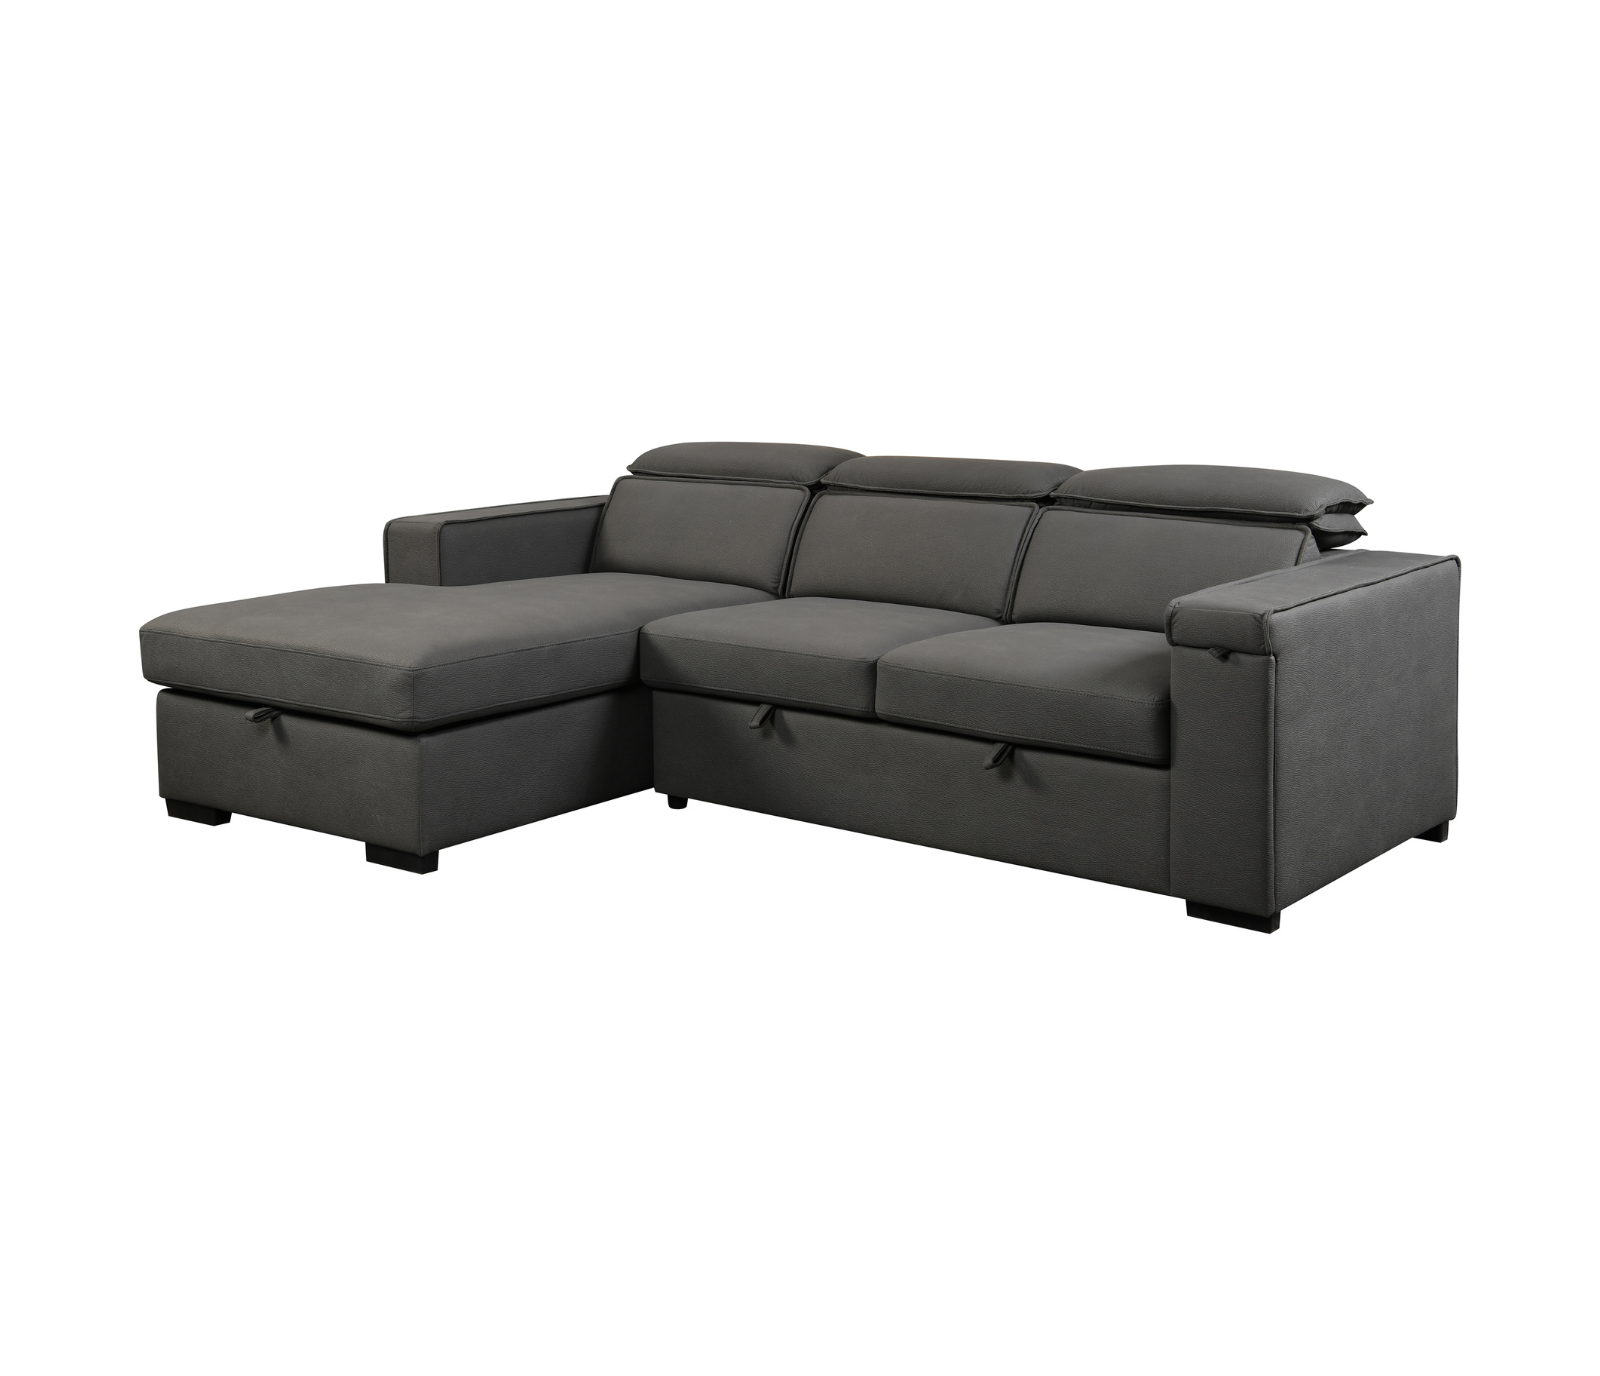 Axela 2 Piece Sectional w/ Pull-Out Sleeper - Cement Fabric